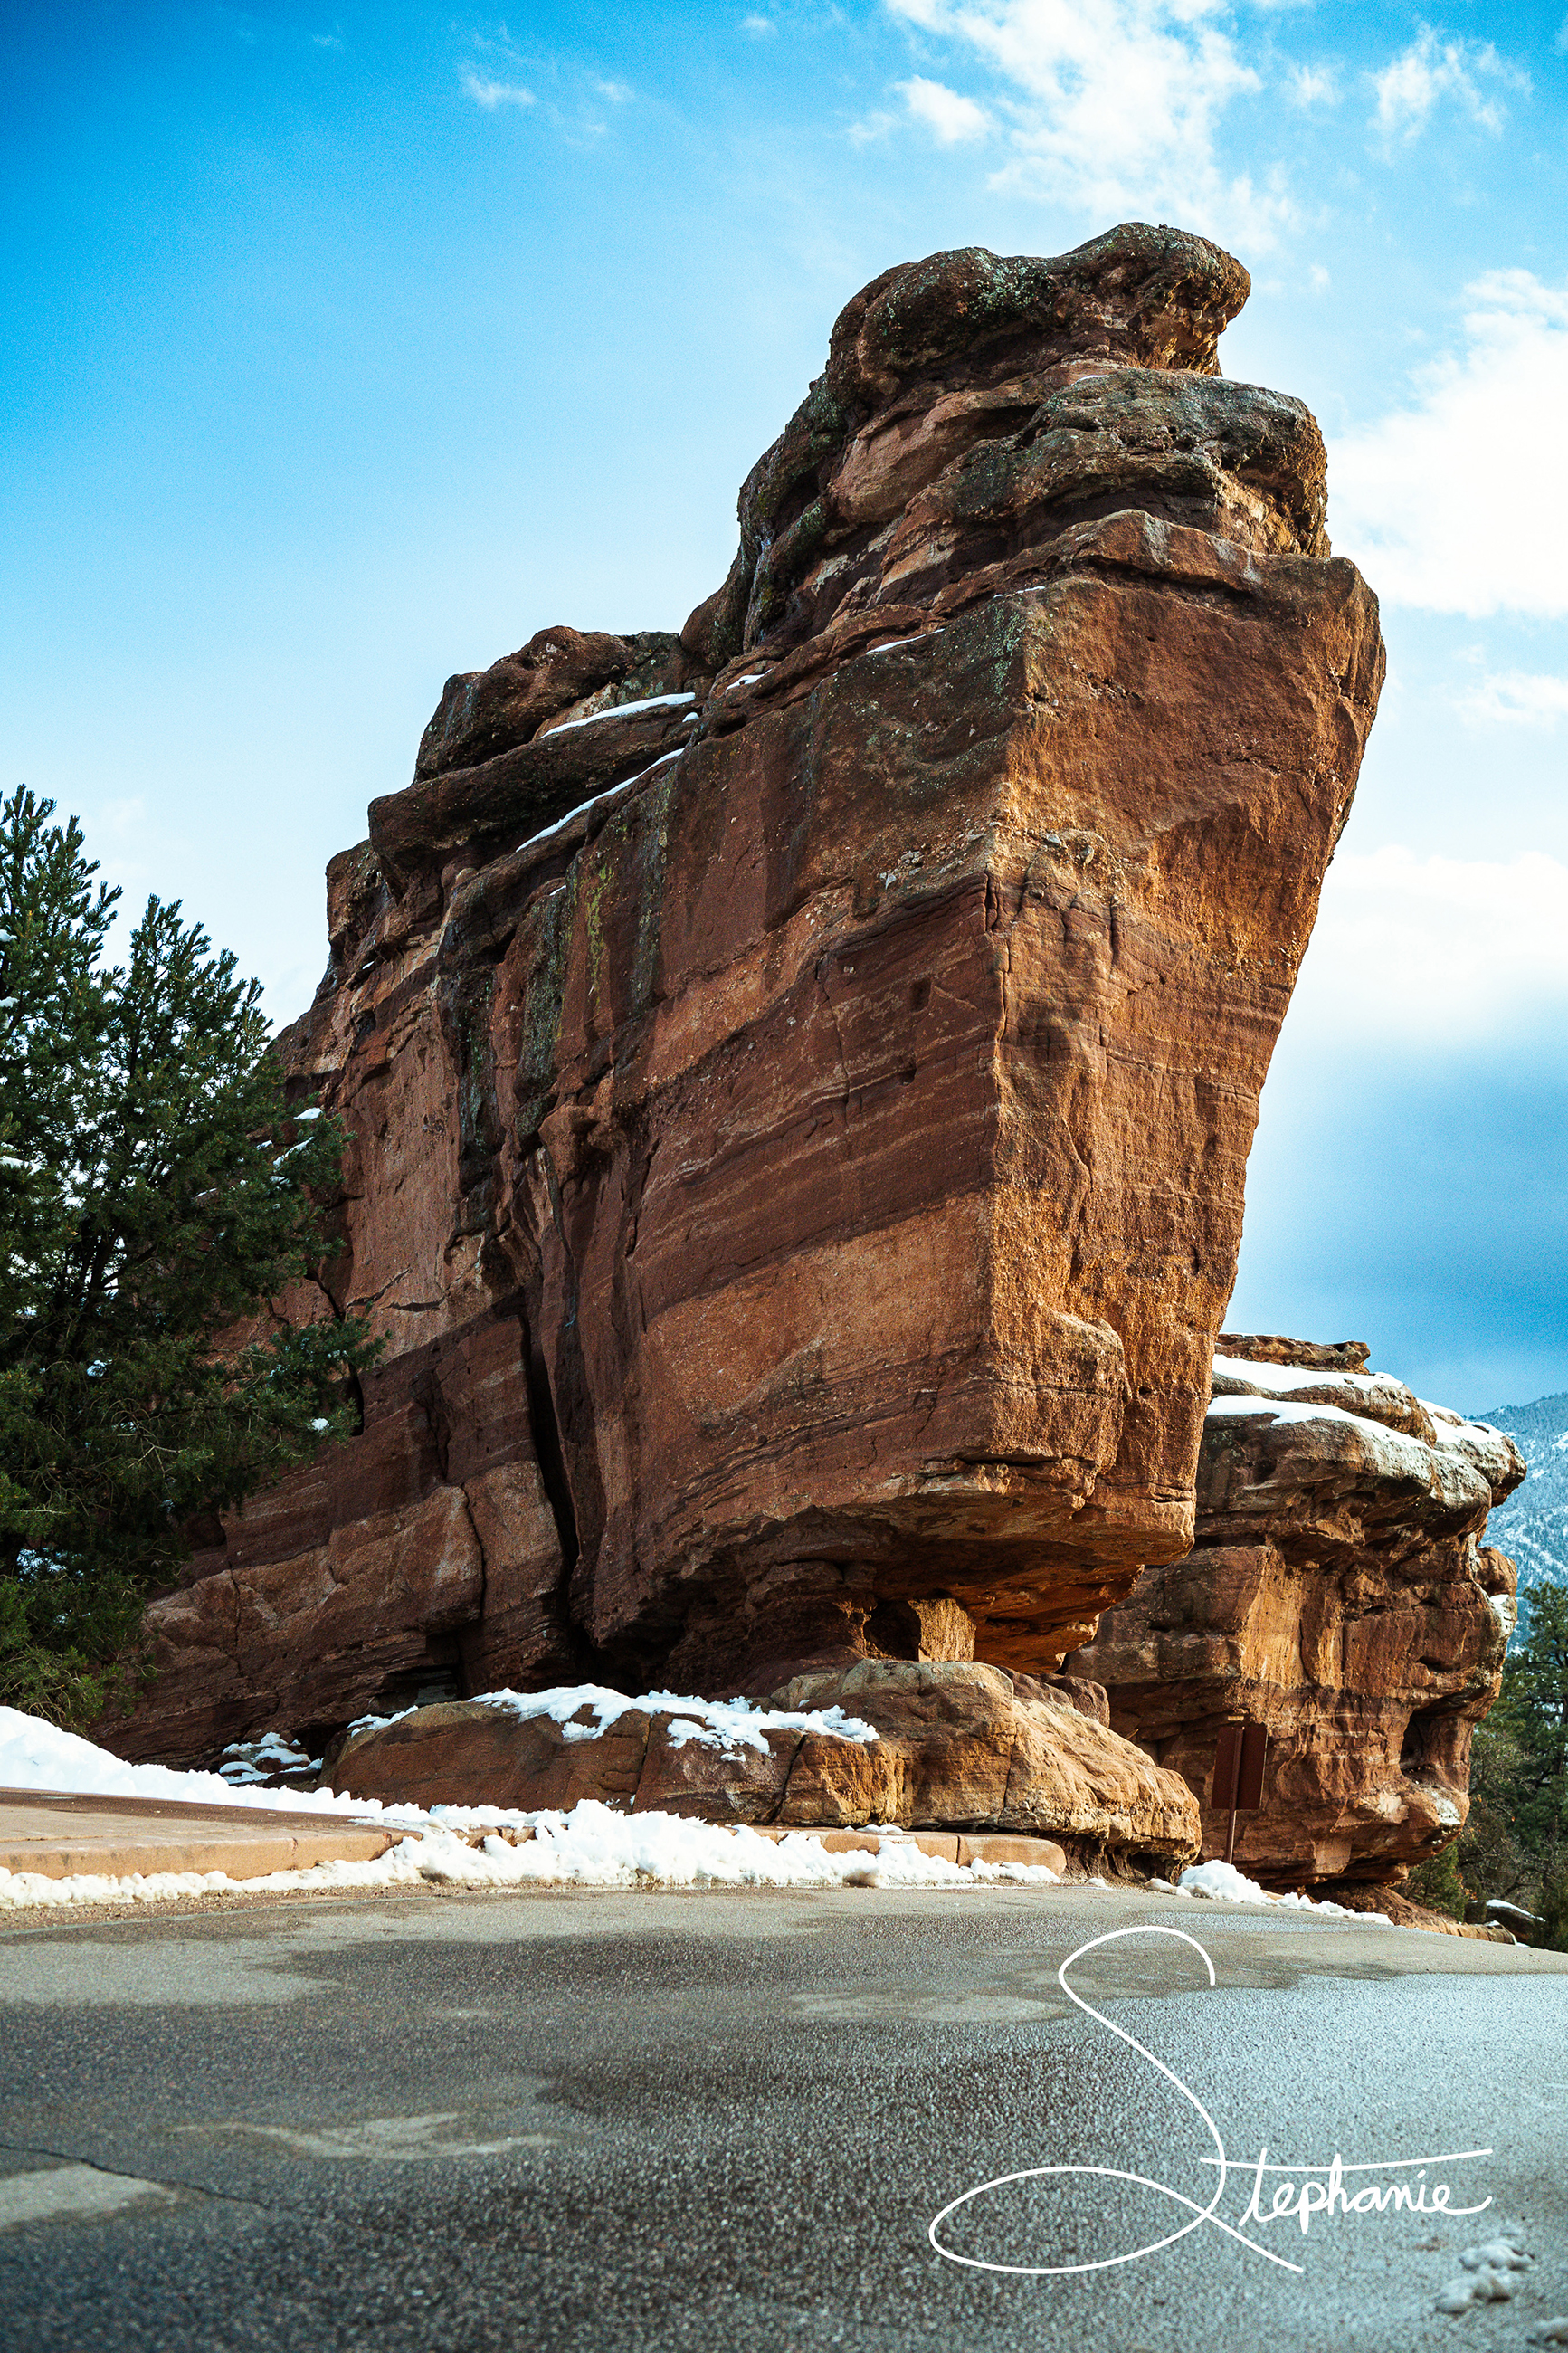 Photo of the Steam Boat rock formation in Garden of the Gods, Colorado.